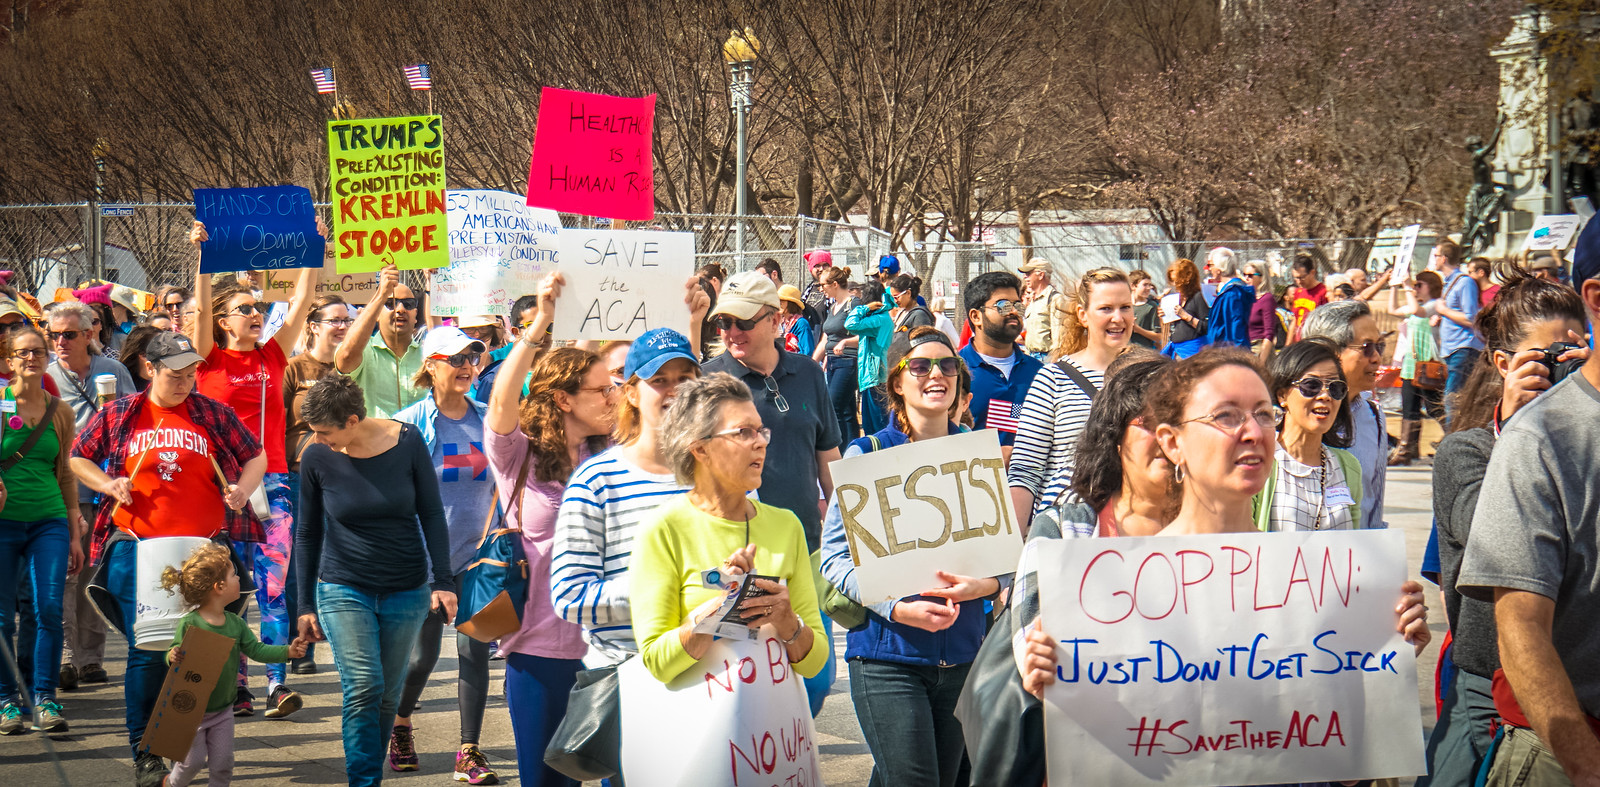 2017.02.25 Rally in Support of Affordable Care Act #ACA Washington, DC USA 01283